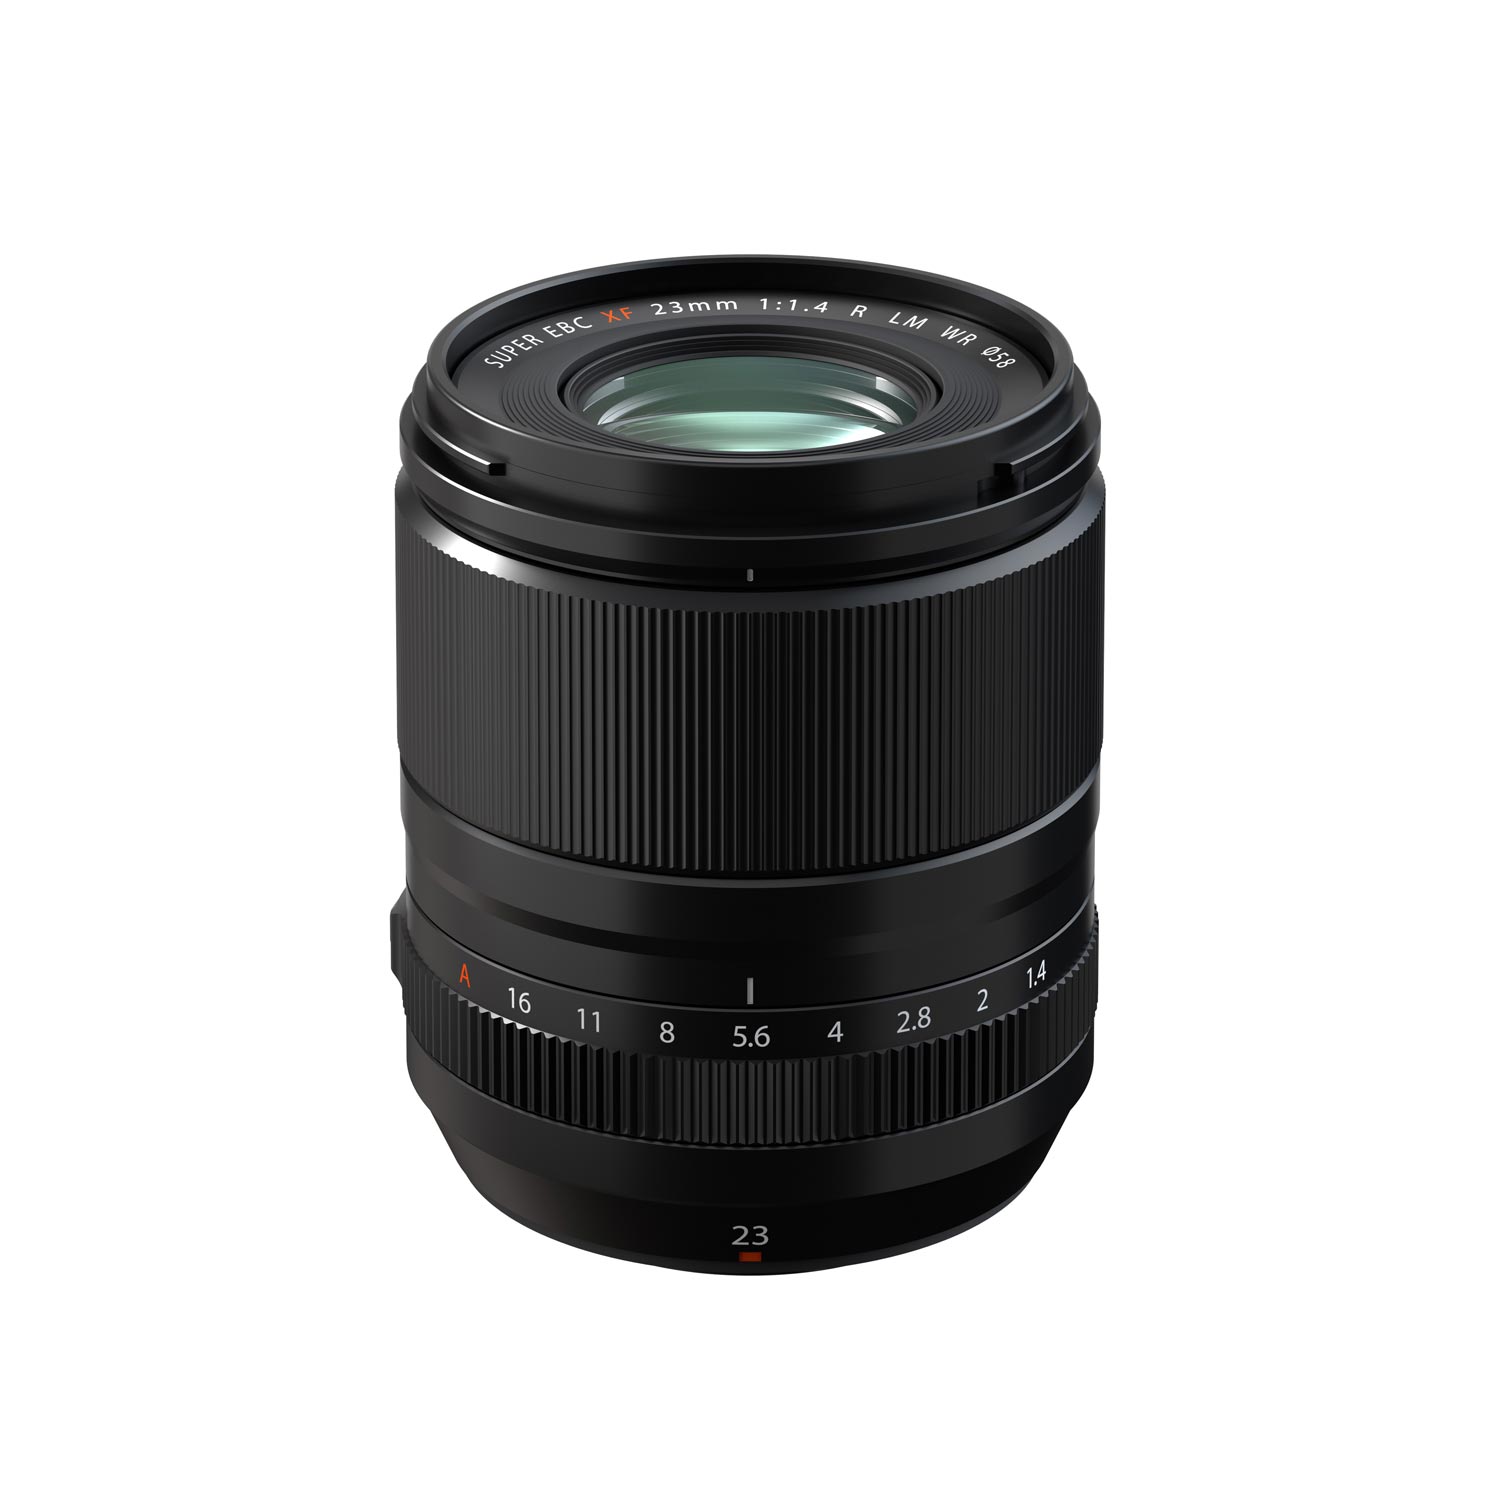 TThumbnail image for Fujinon XF 23mm F1.4 R LM WR